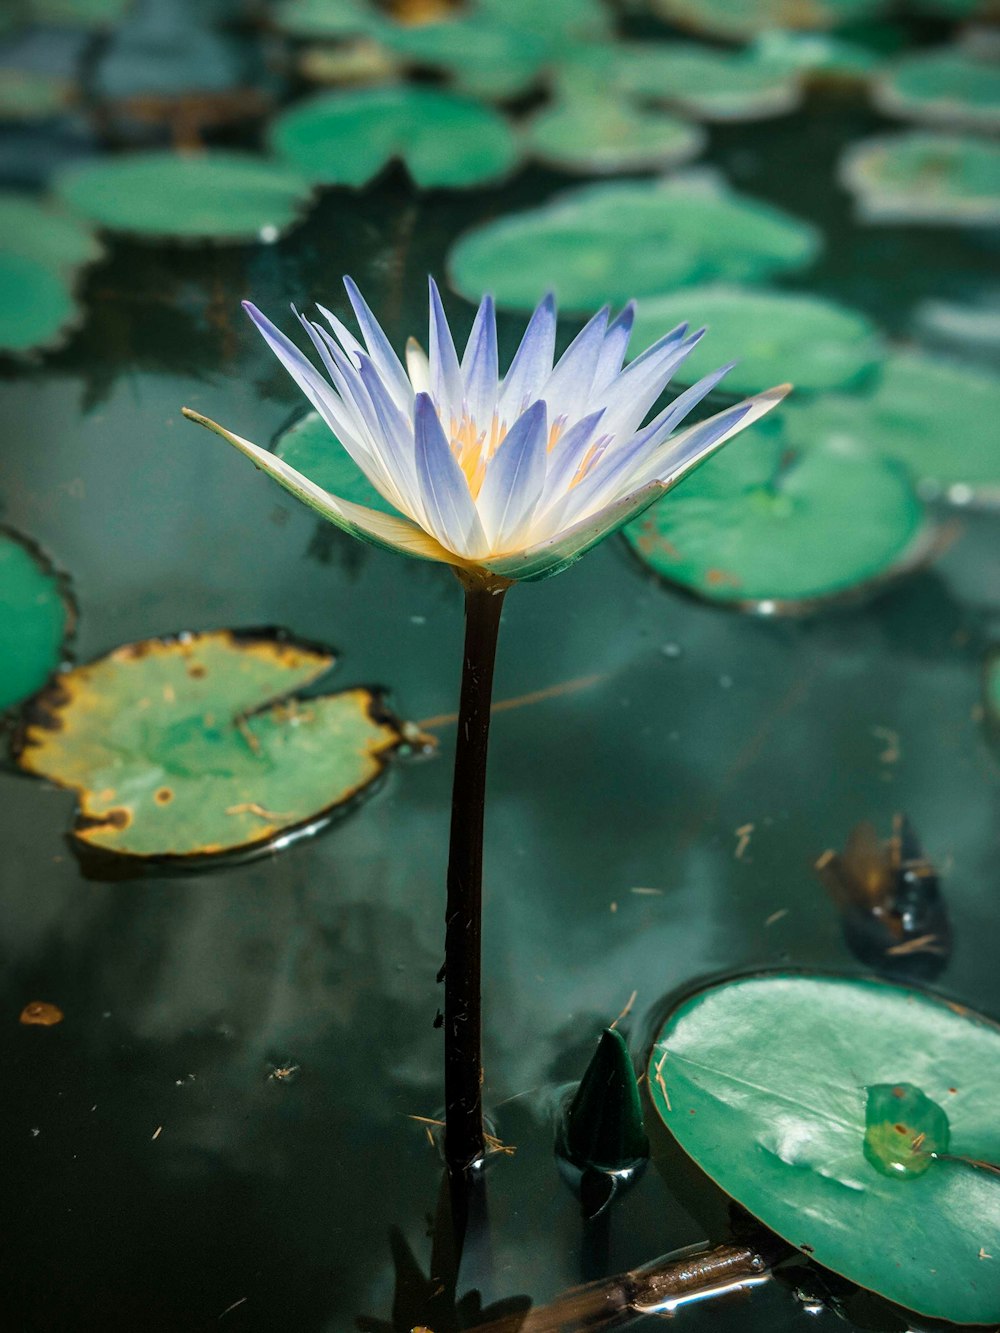 a white water lily in a pond with lily pads